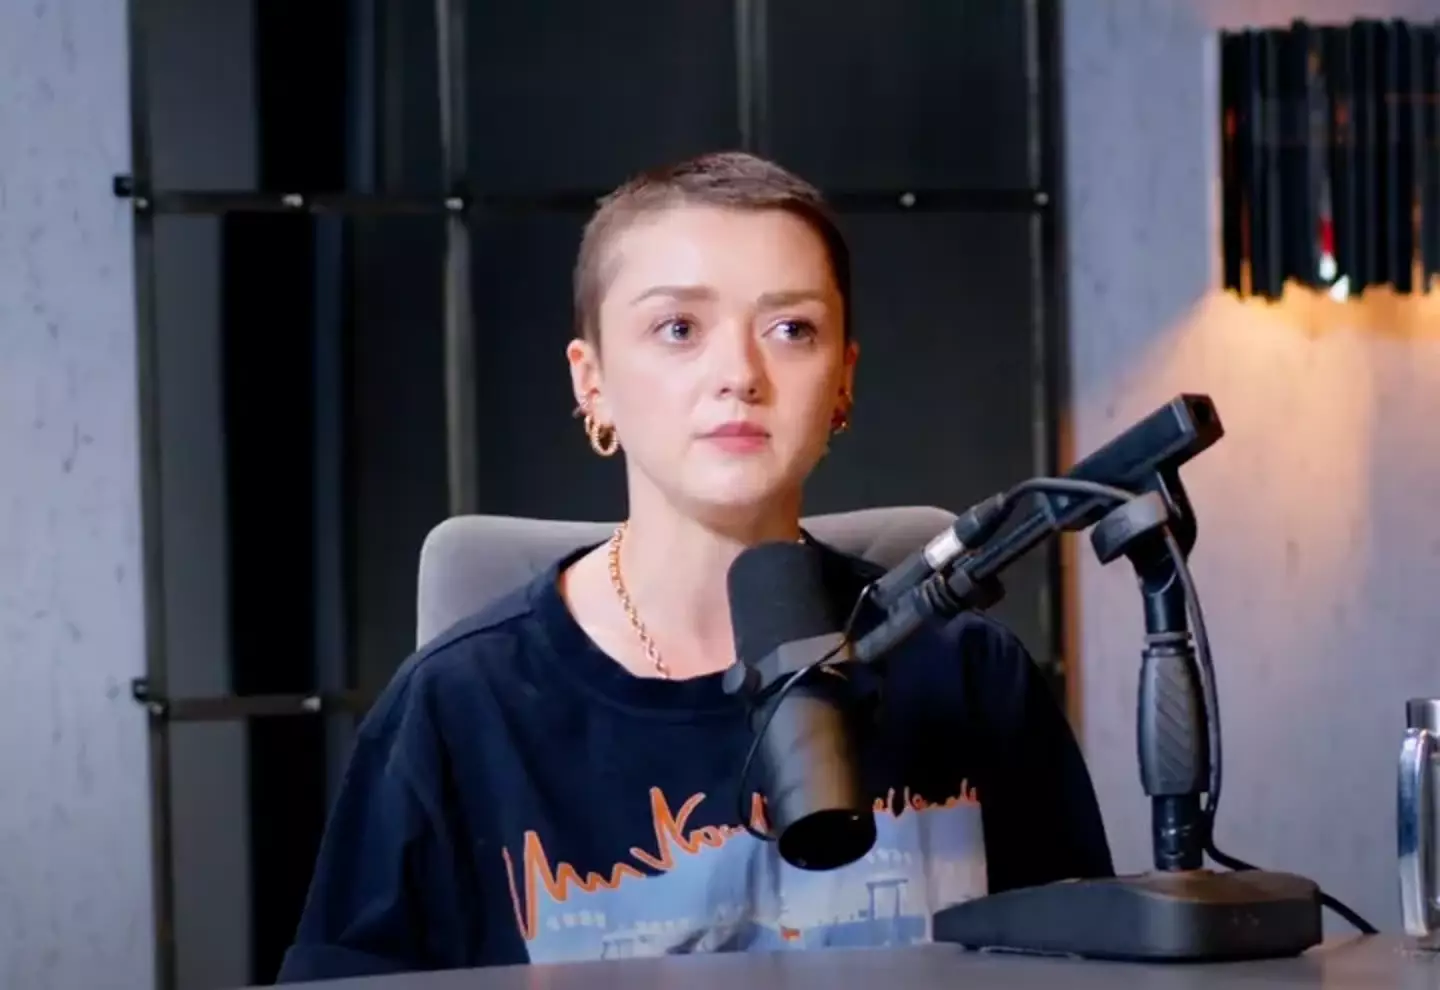 Maisie opened up about her childhood in the interview.